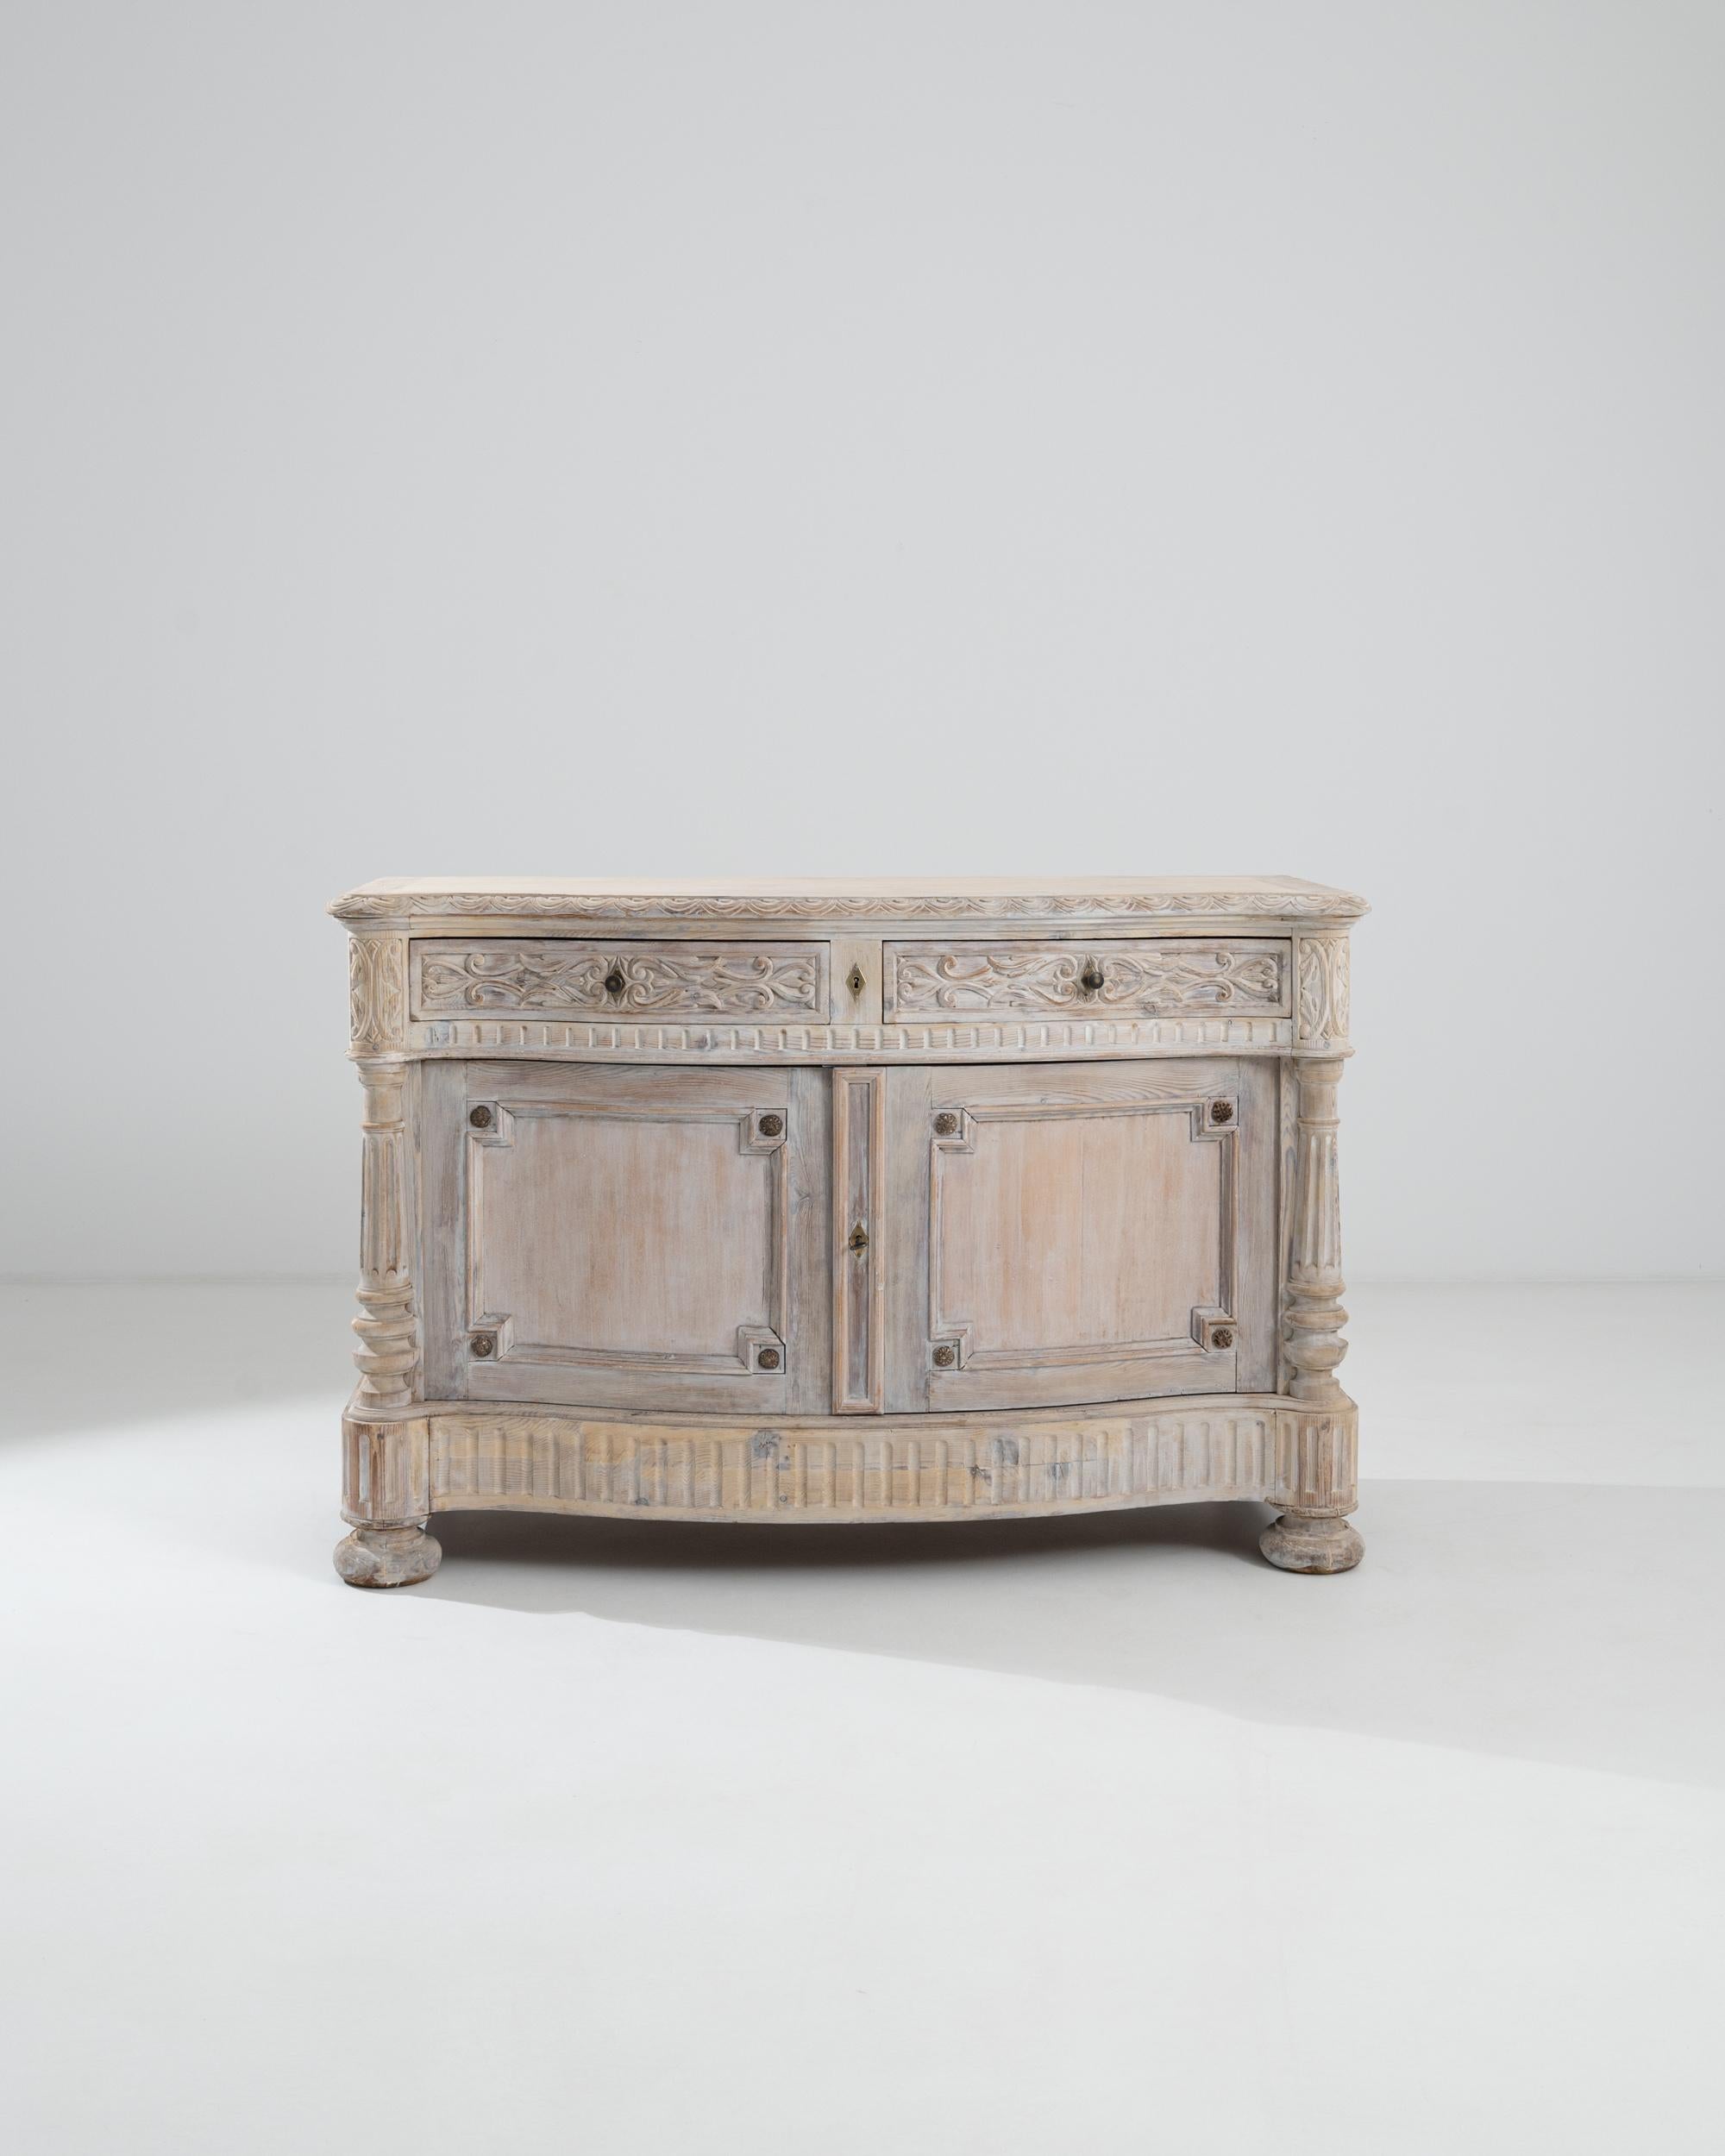 This magnificent carved wooden buffet offers a unique antique accent. Made in Belgium in the 1800s, a gentle patina lends a dreamy inflection to the grand and eloquent design. Geometric paneling and fluted moldings speak to Neoclassical influences,